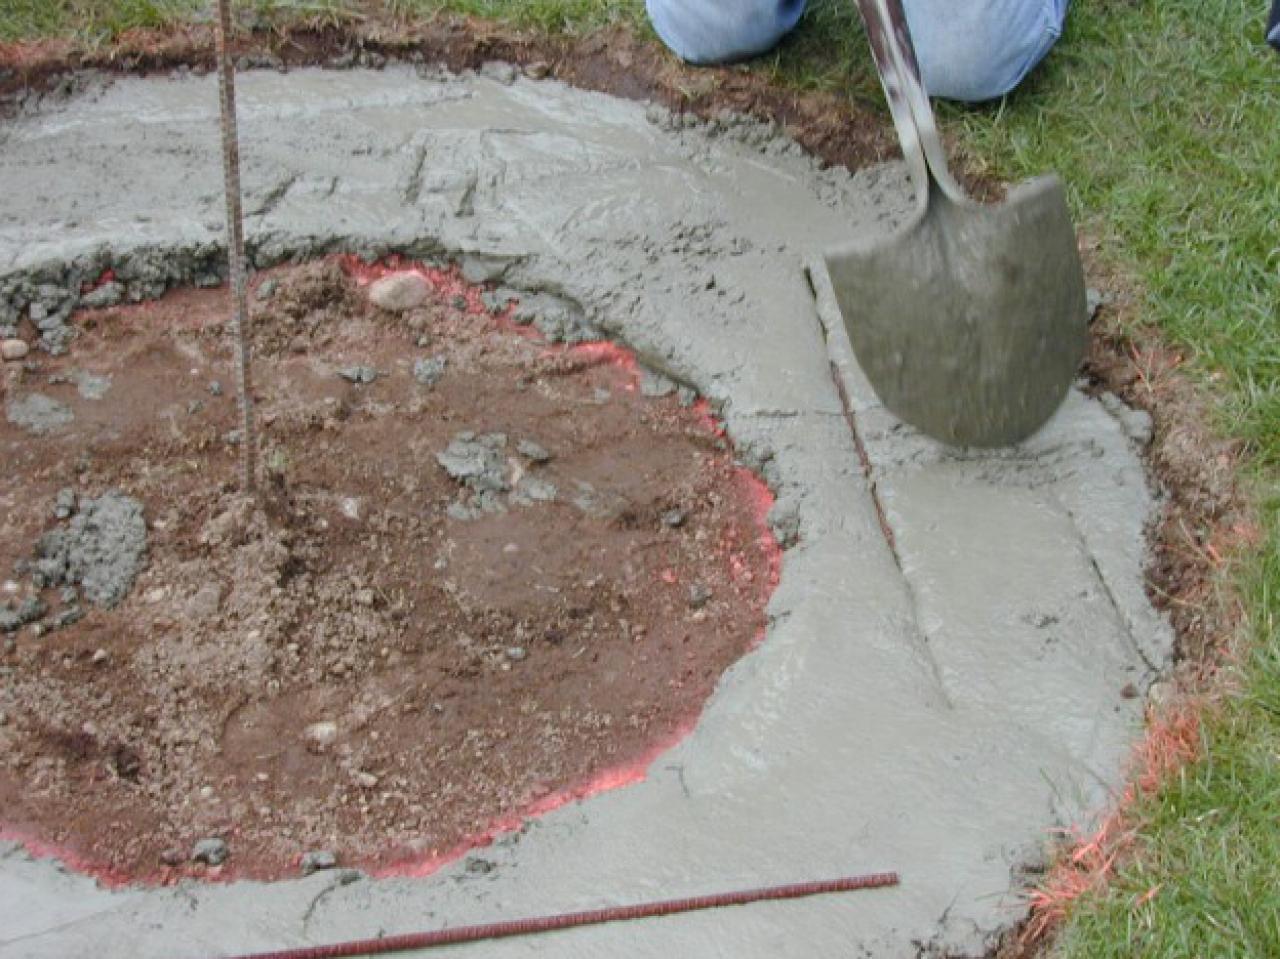 How To Prepare For A Fire Pit Tos, Fire Pit Mortar Mix